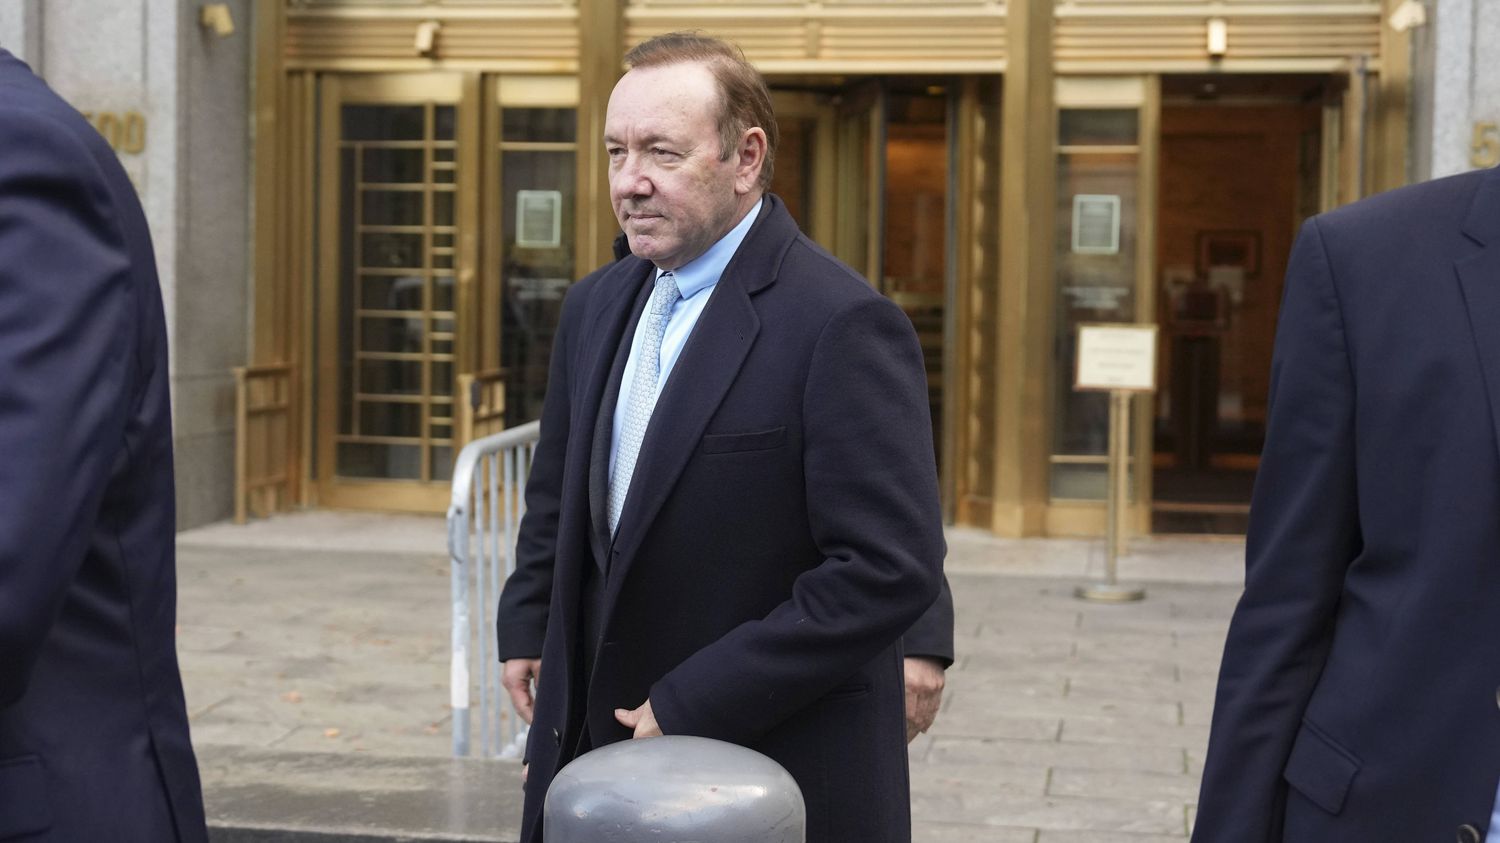 Kevin Spacey found not guilty of sexual assault in New York civil court
